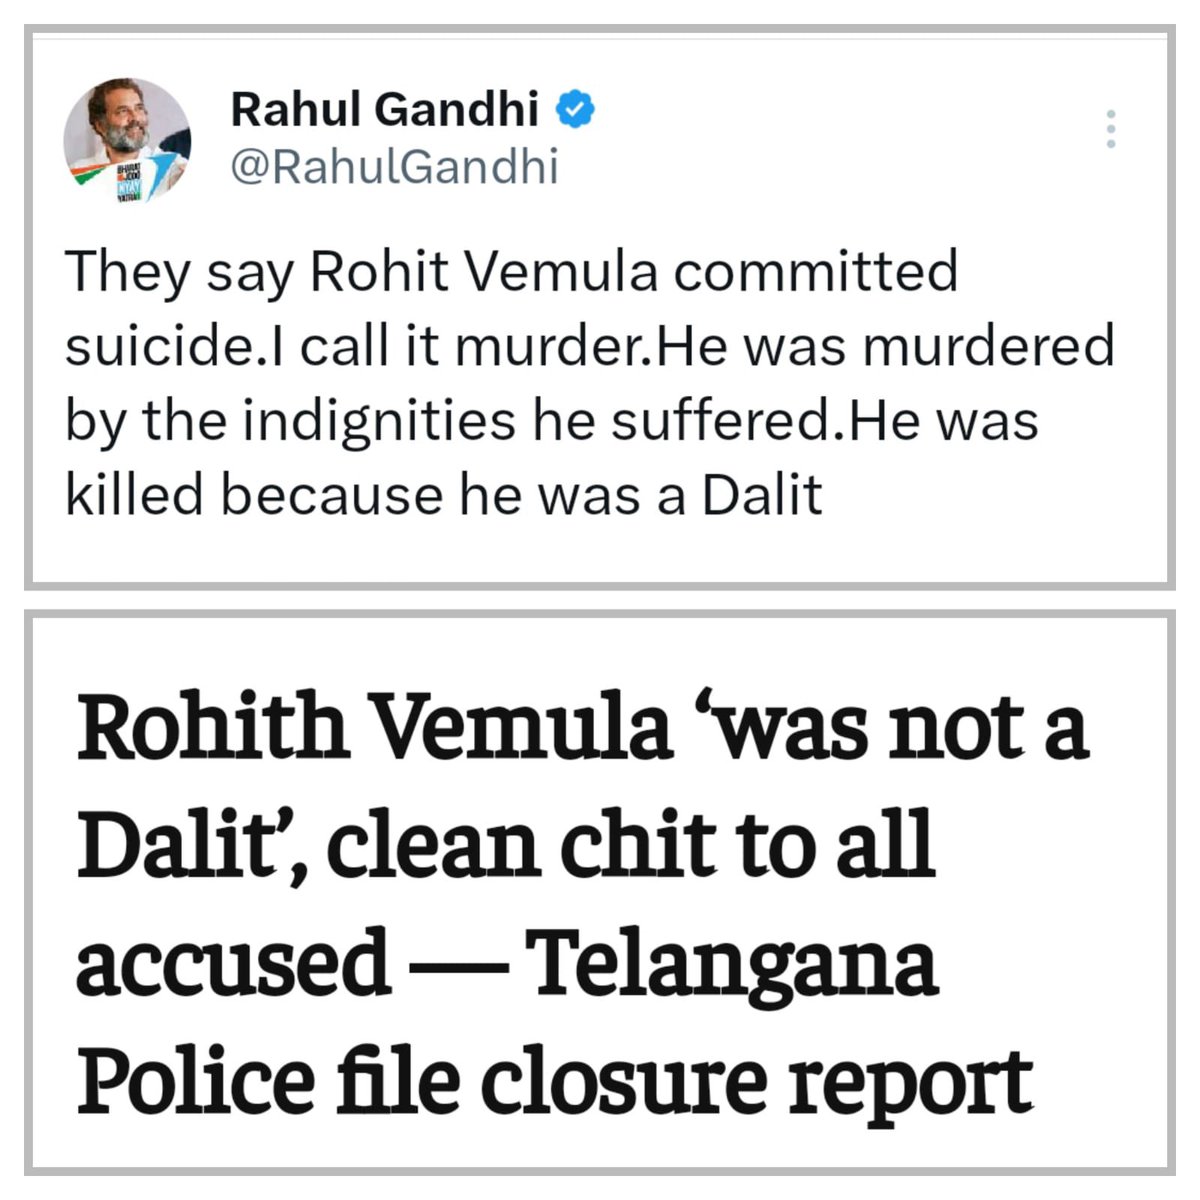 Typical congress/leftist propaganda run for months and years because of agenda driven govt admn/police and prolonged judicial process. Damage is done in short time with wild accusations and allegation. Eventually, every such agenda driven campaign fall flat.. #RohitVemula